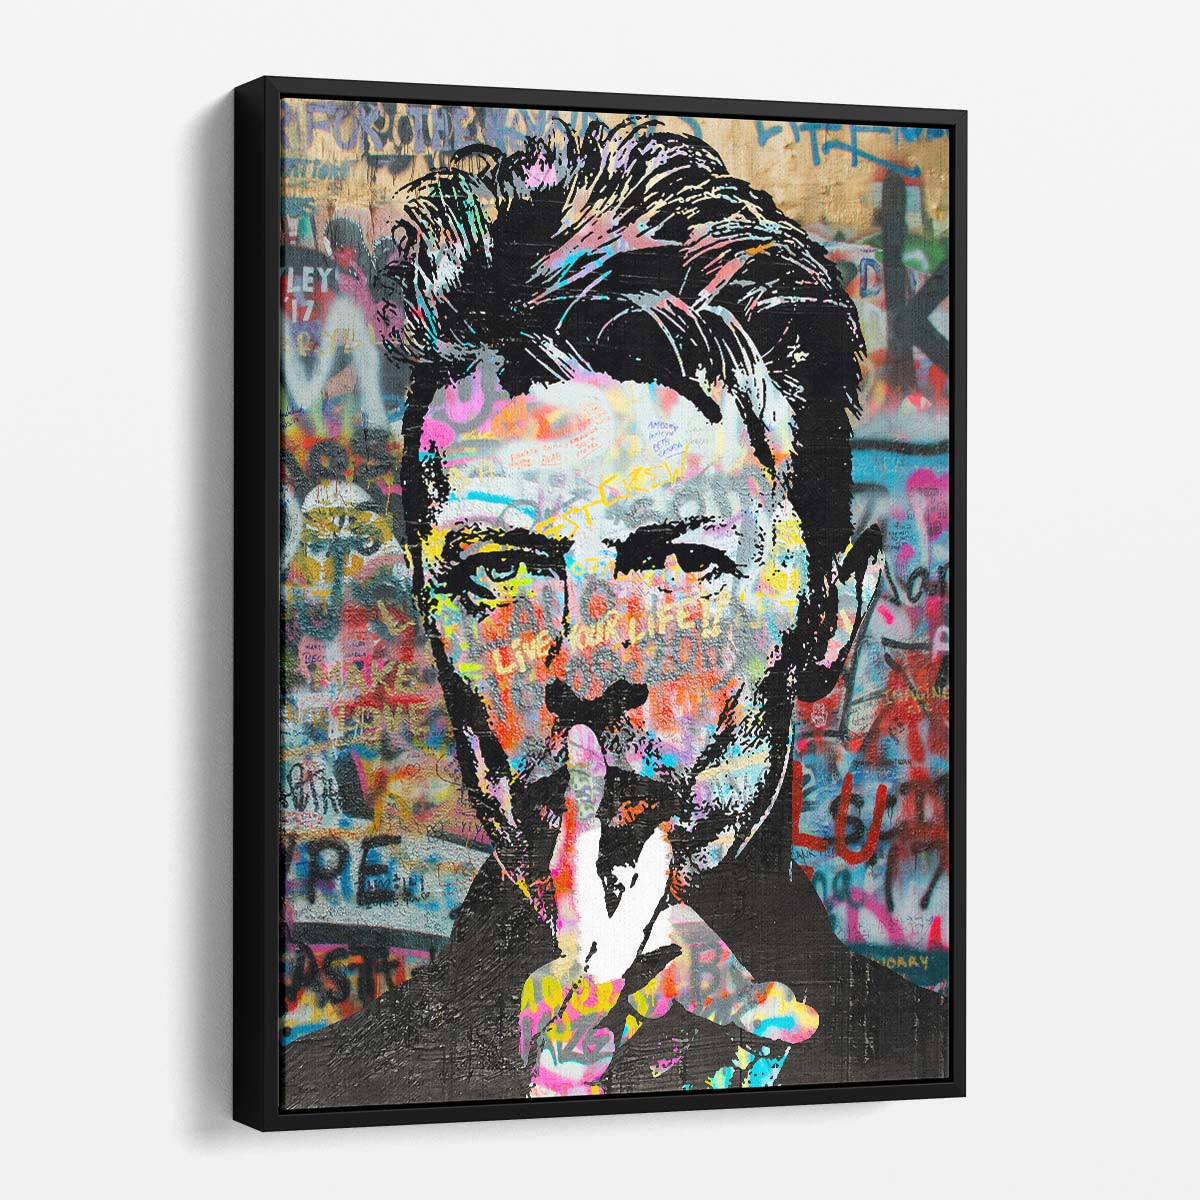 David Bowie Painting Graffiti Wall Art by Luxuriance Designs. Made in USA.